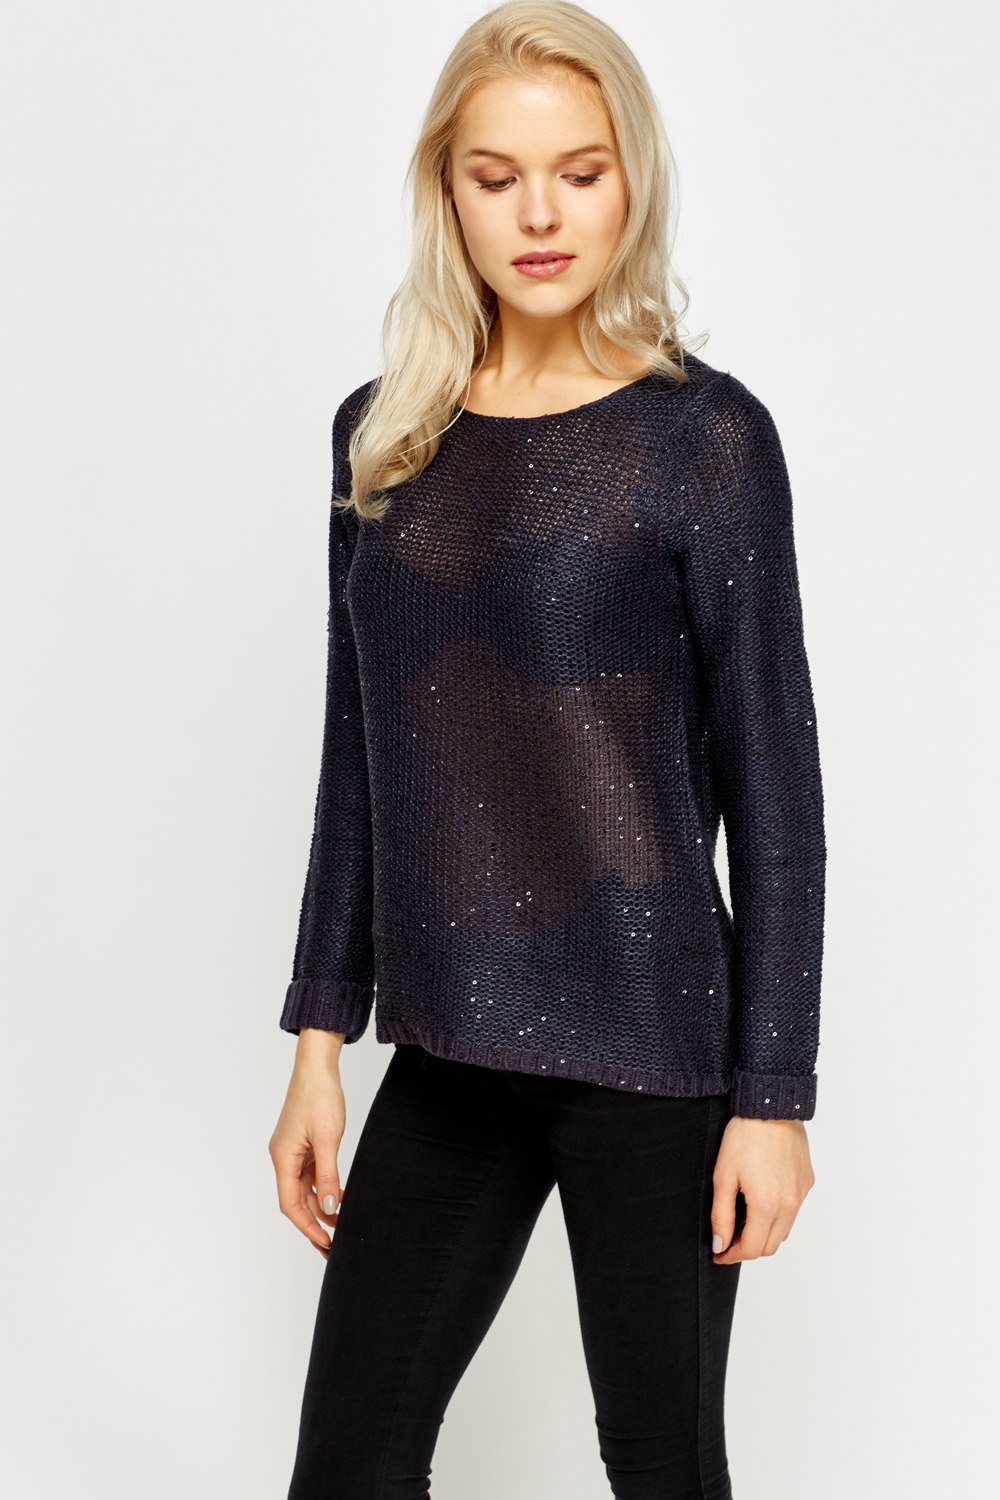 Navy Knitted Sequin Jumper - Just $7